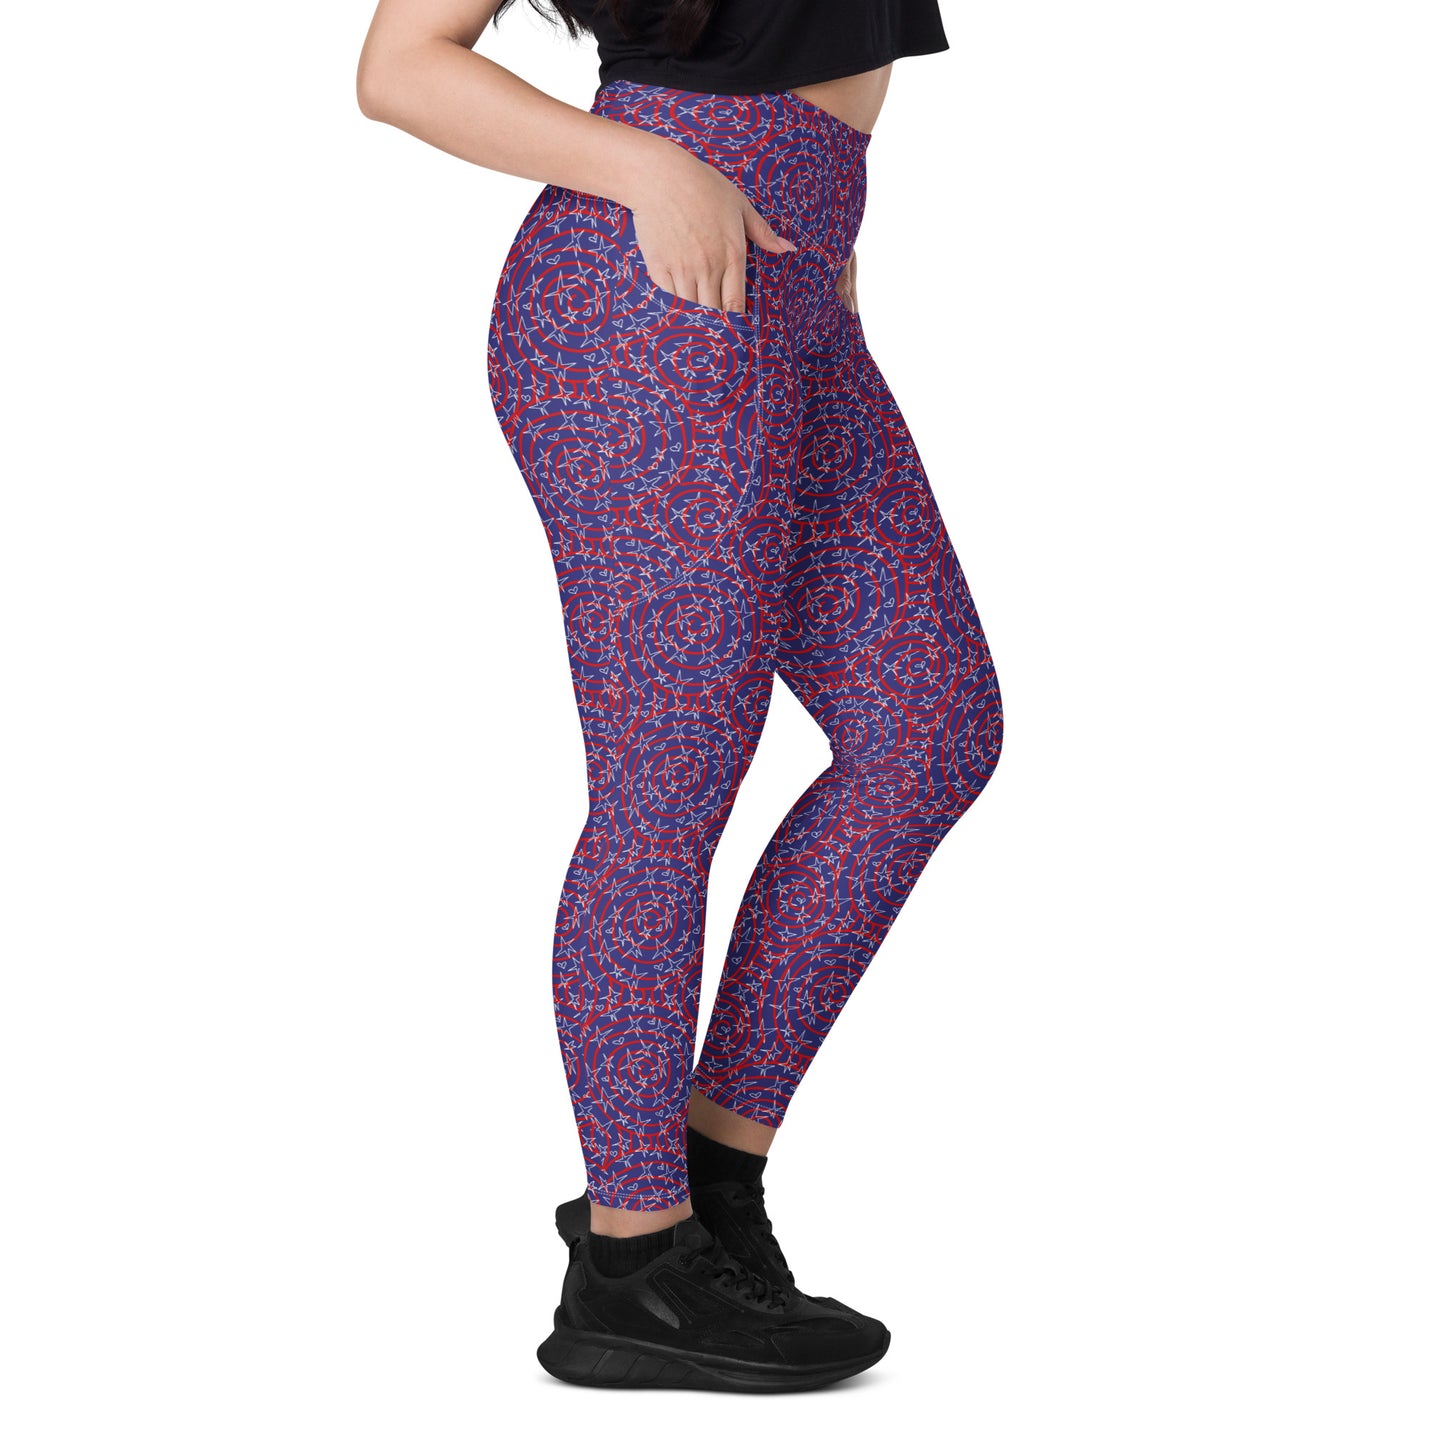 America inspired Leggings with pockets. Design hand-painted by the Designer Maria Alejandra Echenique